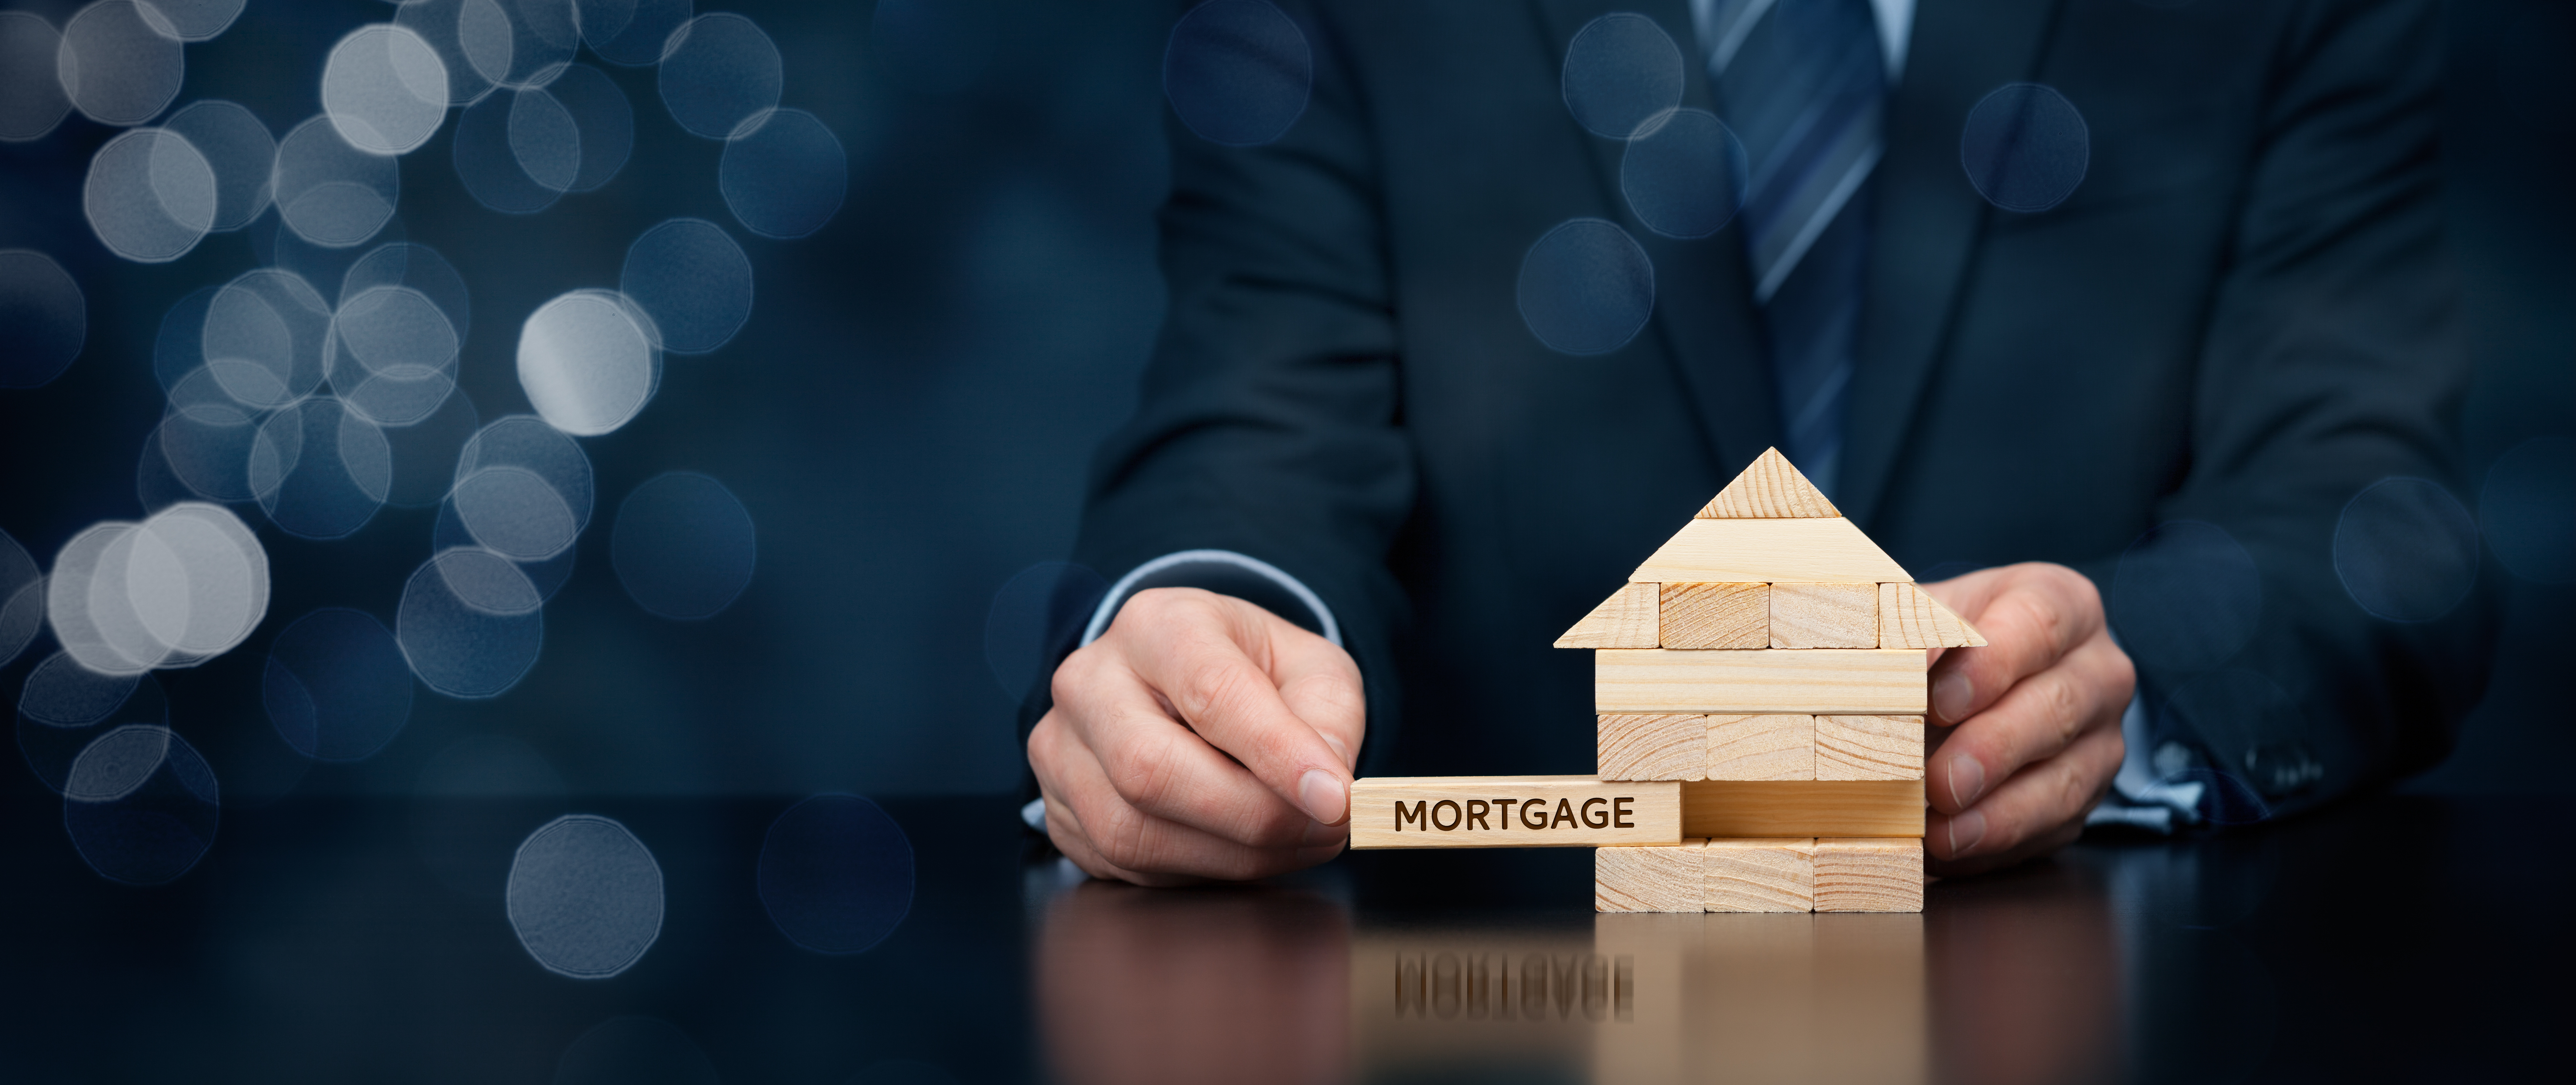 2017 — The Year of Mortgage Technology Integration